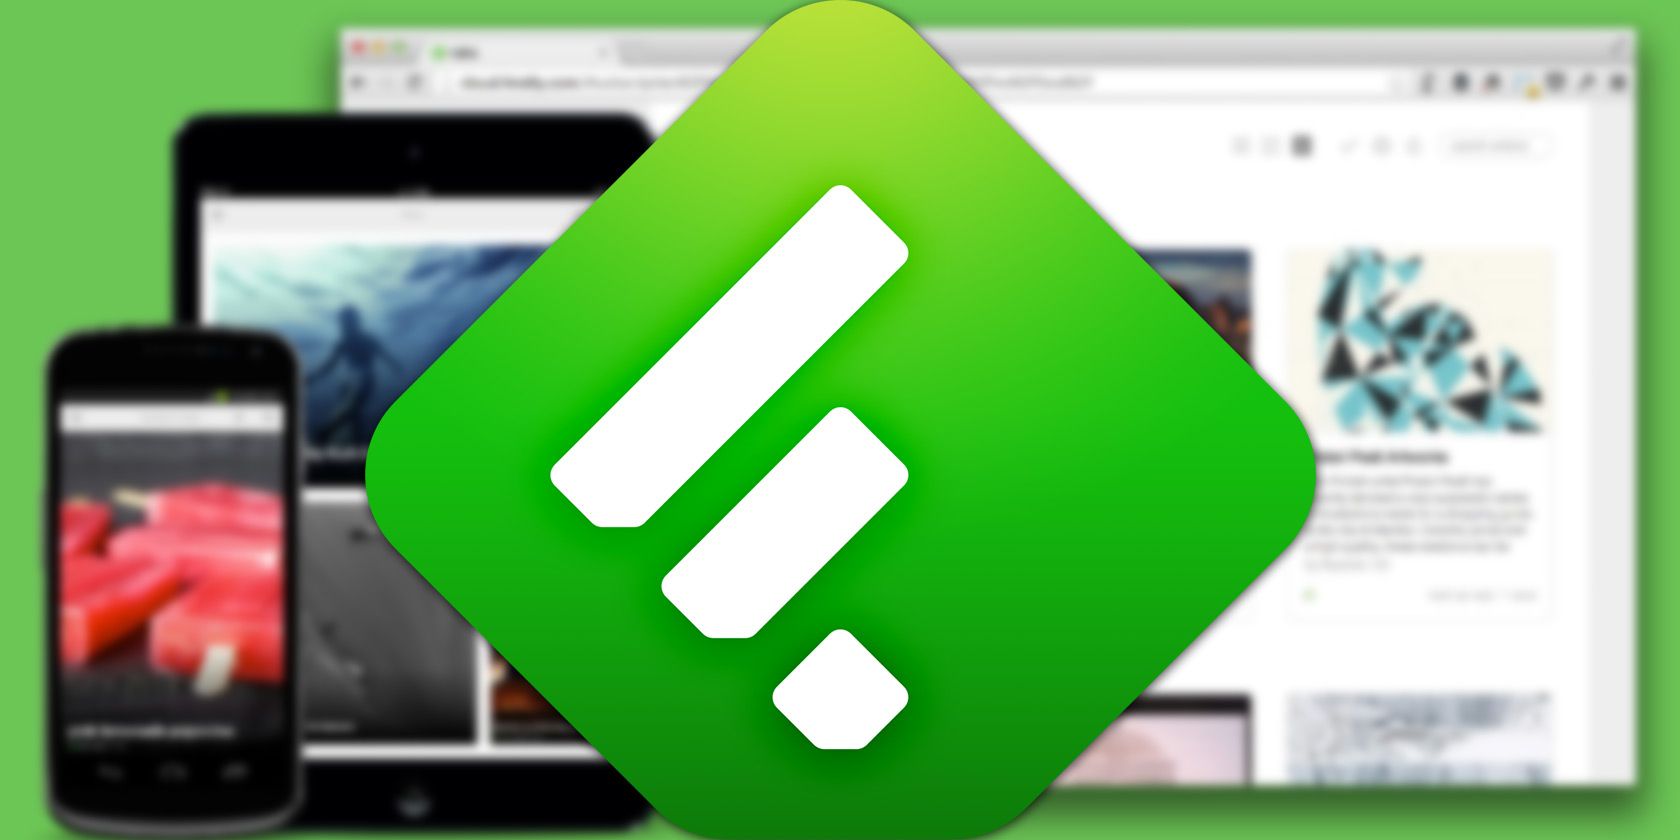 feedly-update